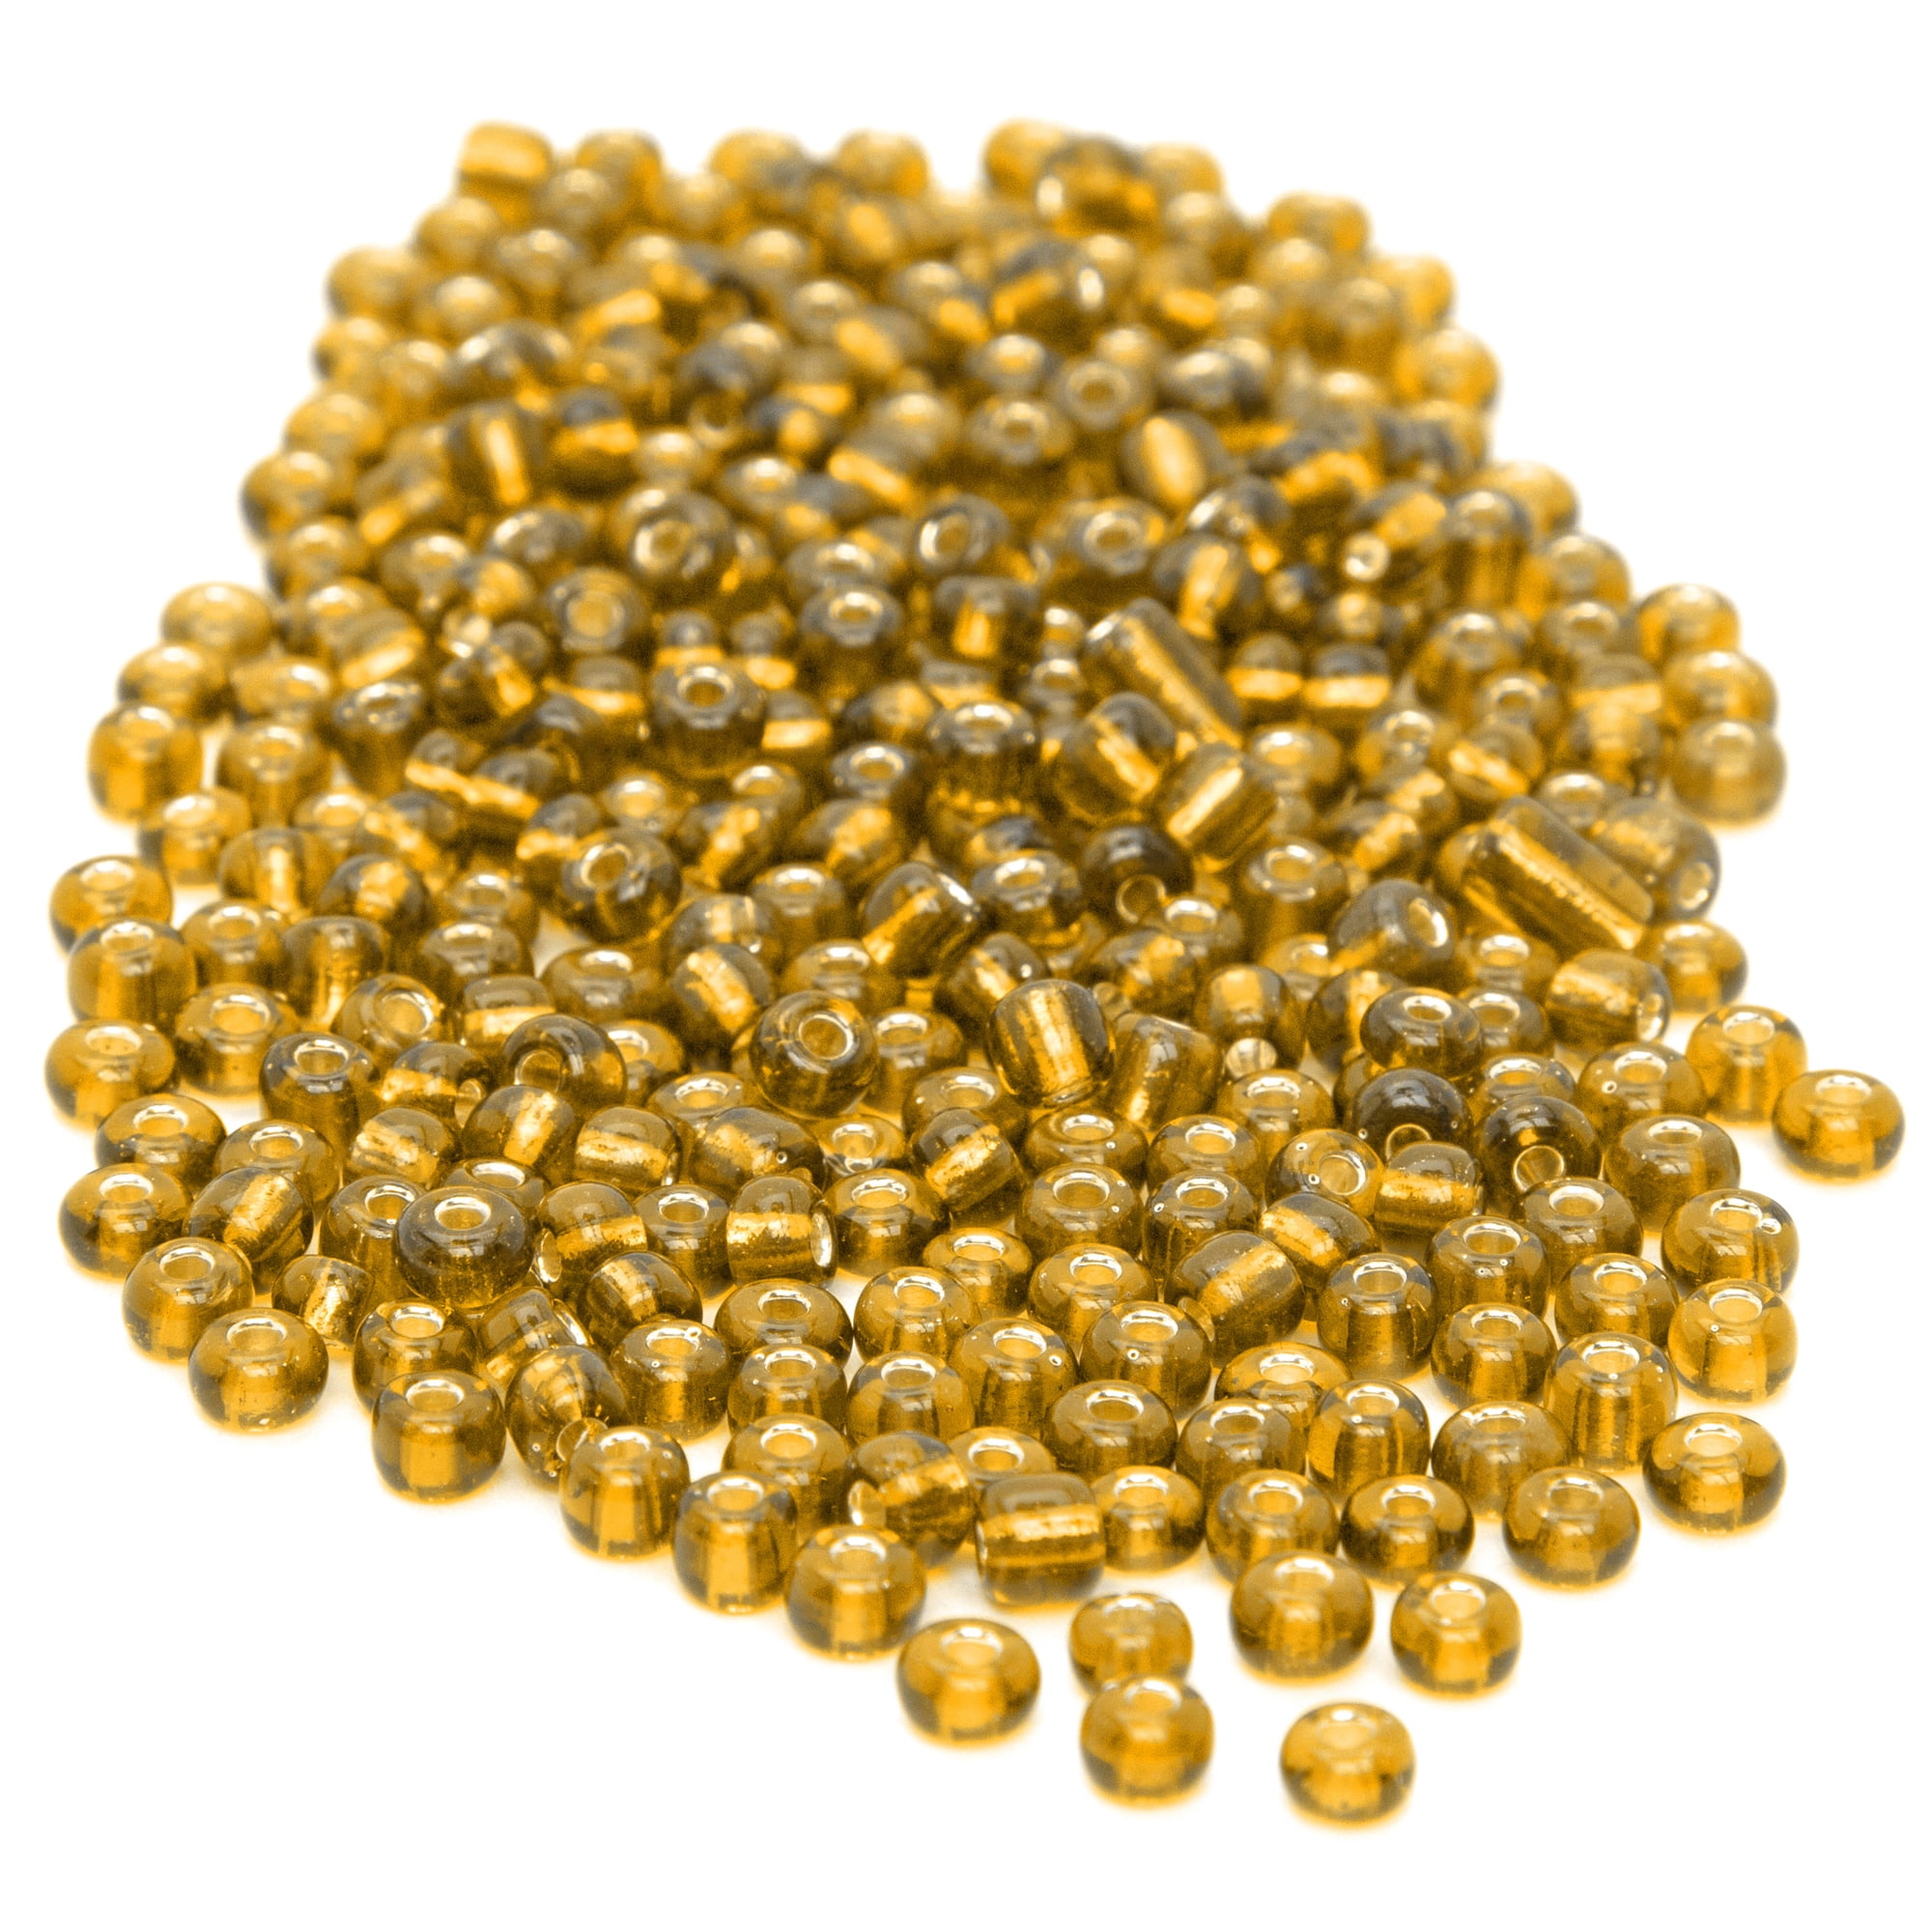 Cousin DIY Glass E-Beads, 40g Pack, Gold Color, 400+ Pieces